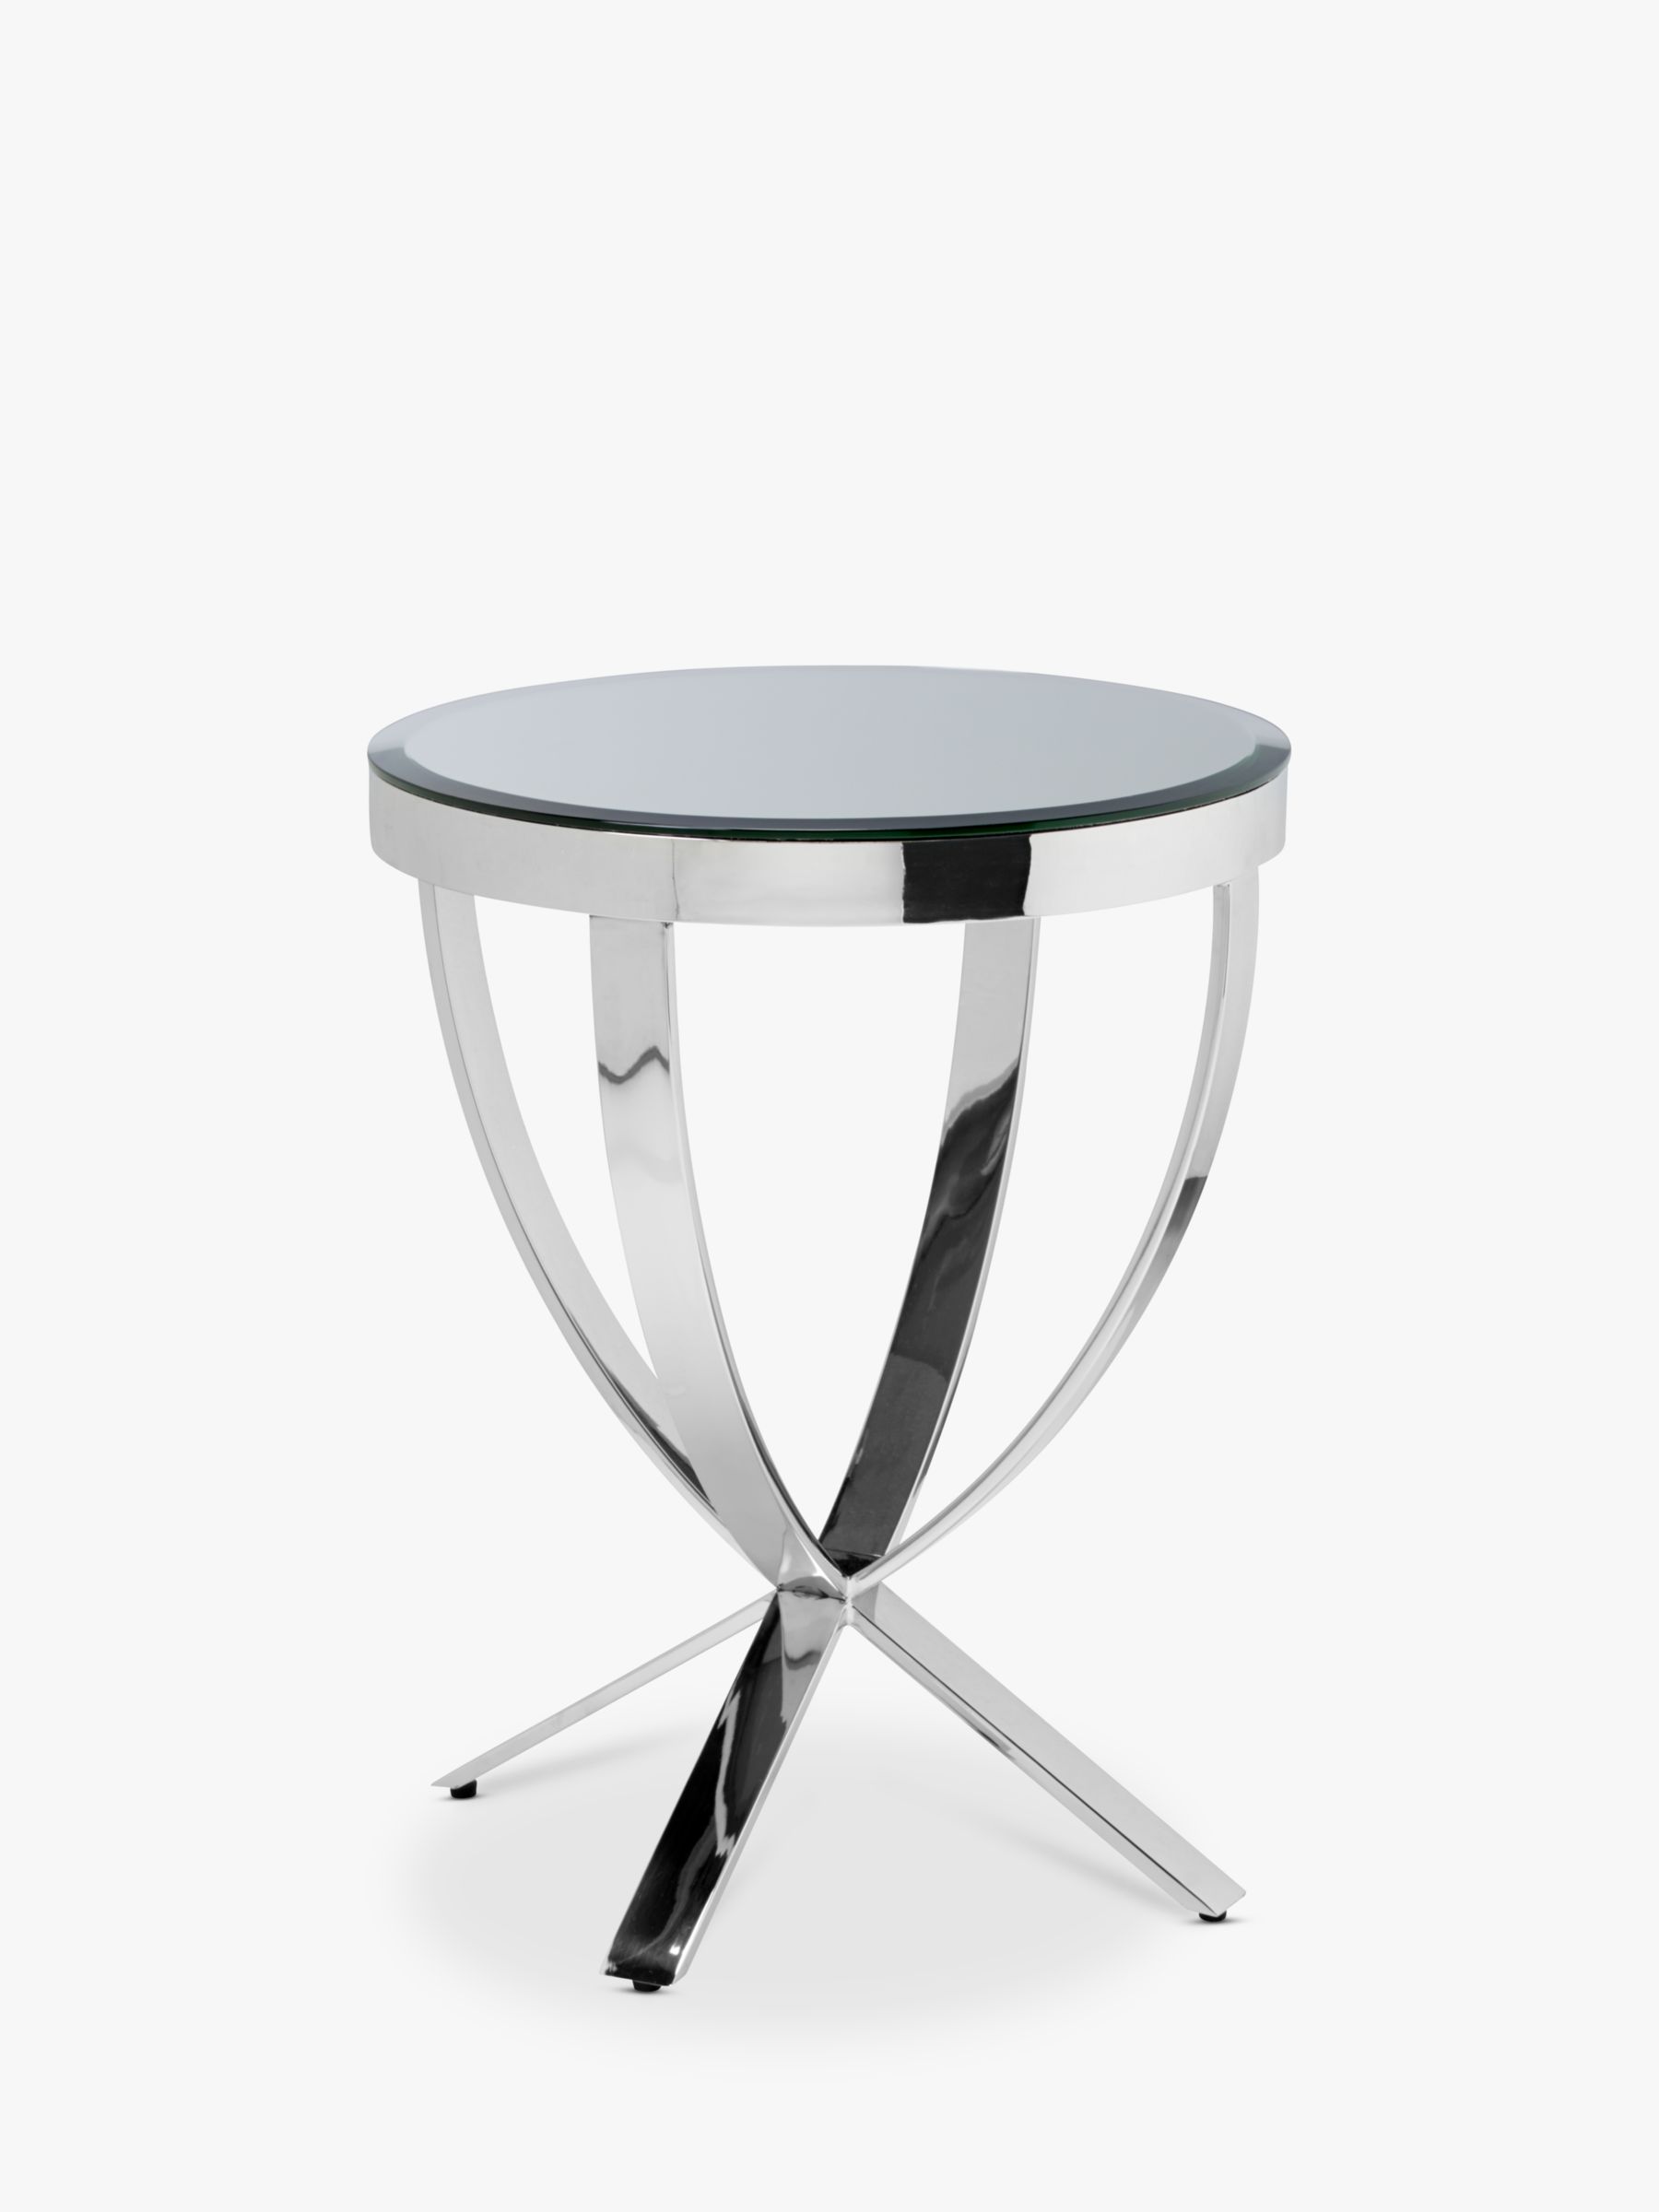 Photo of John lewis moritz side table clear/polished steel